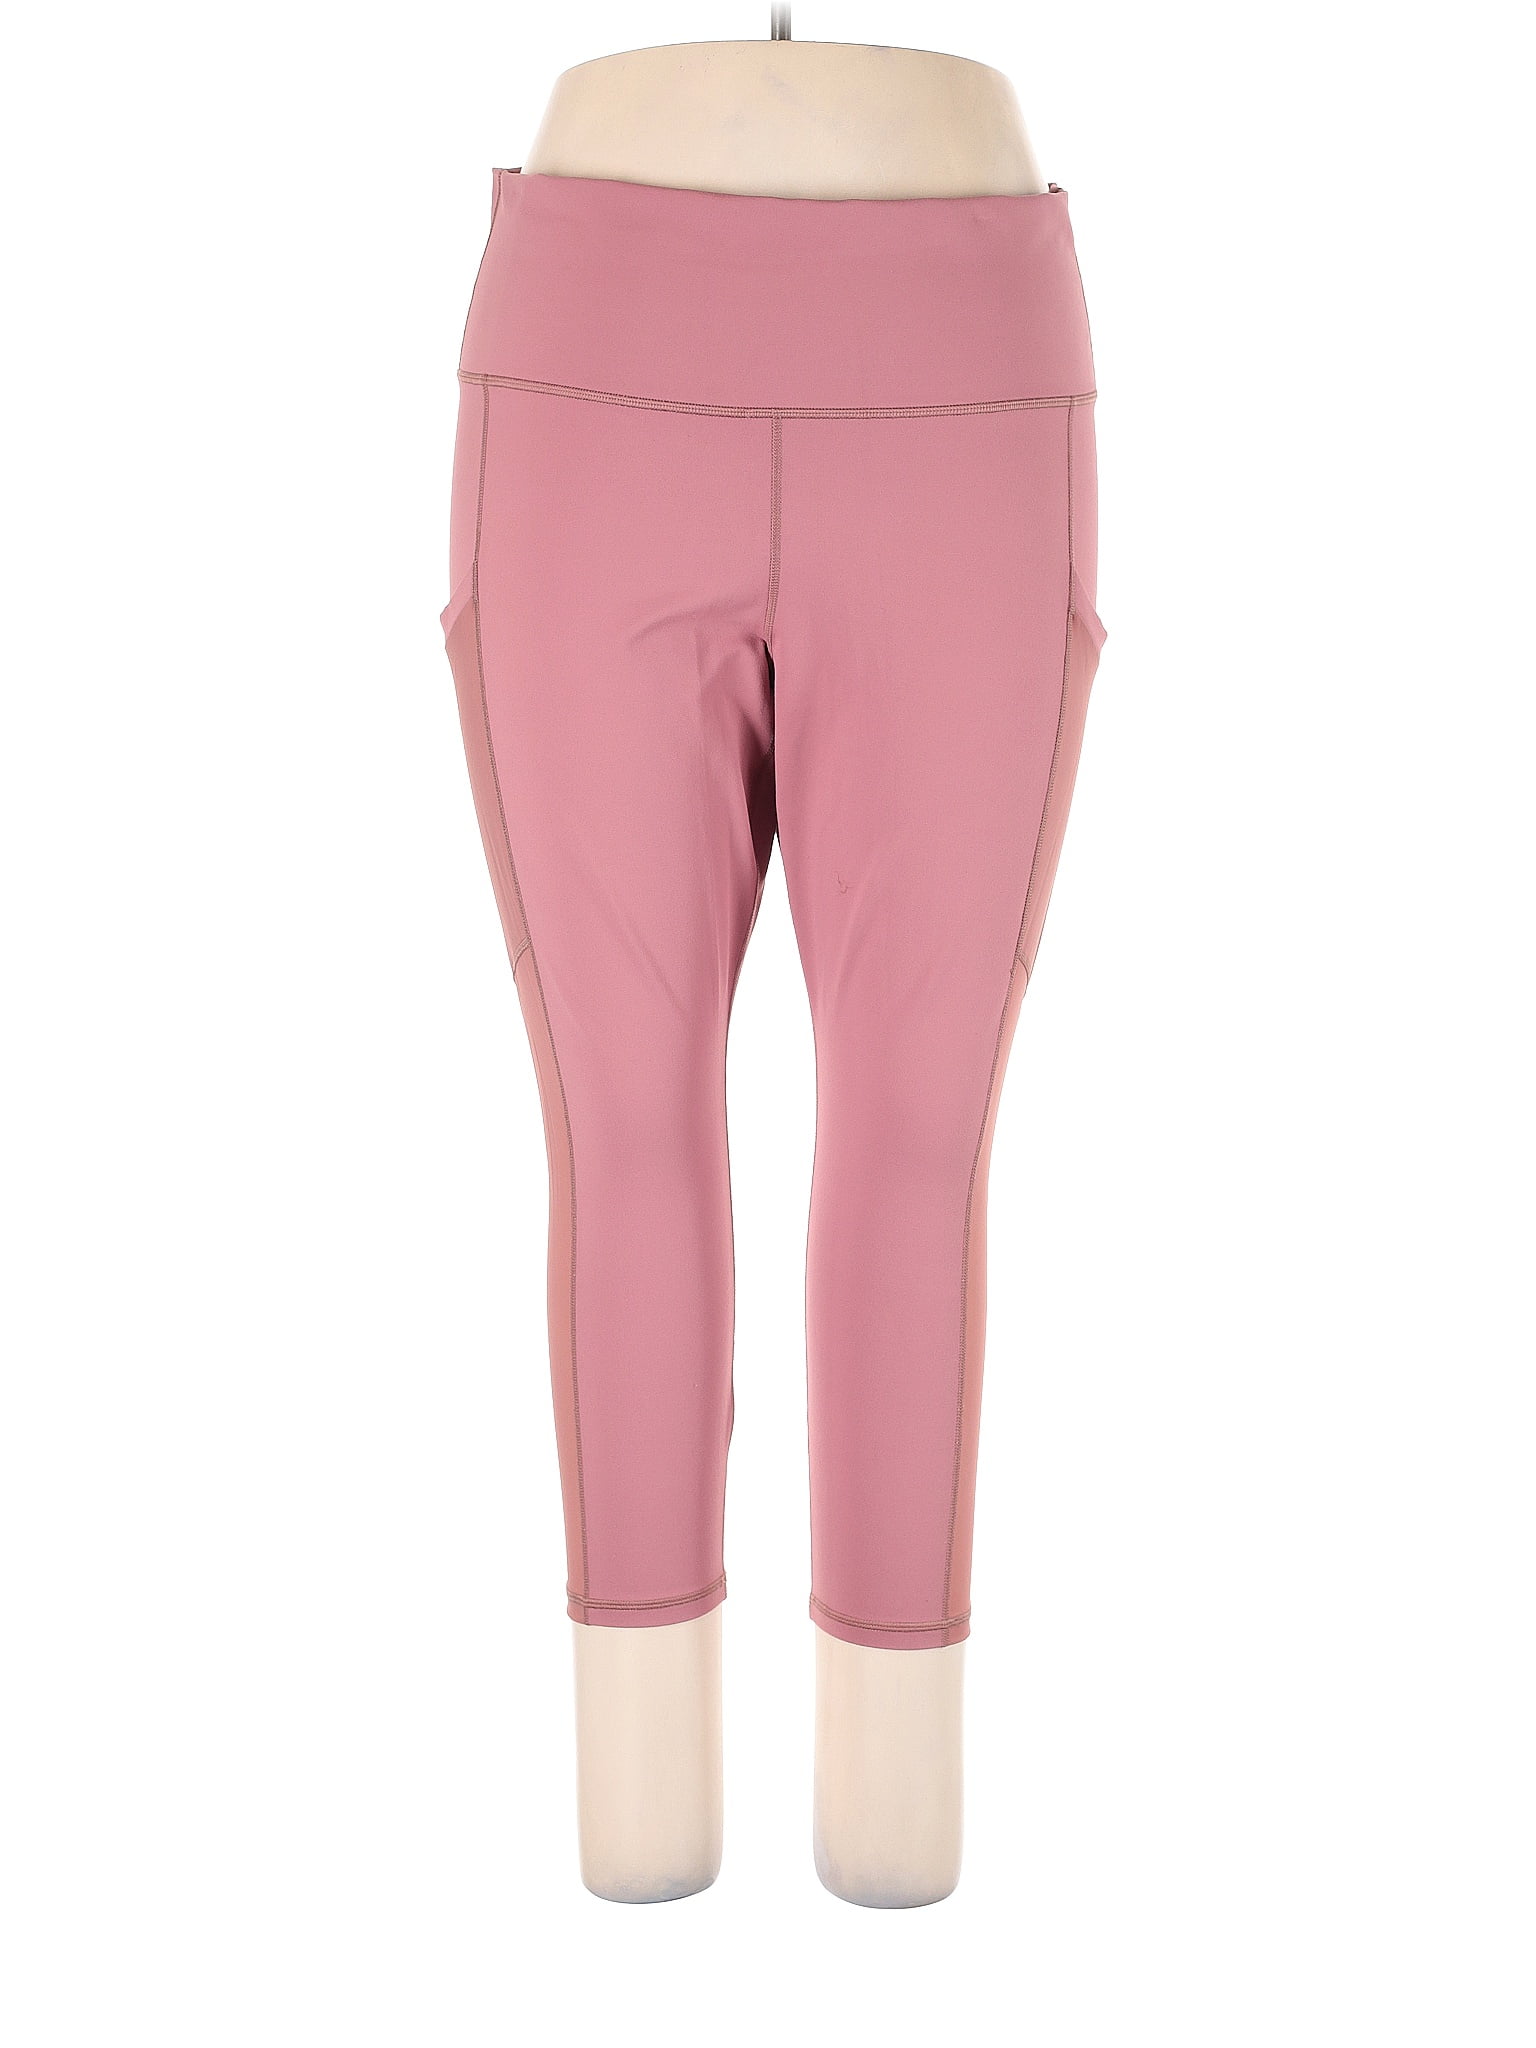 Fabletics Solid Pink Active Pants Size S - 62% off